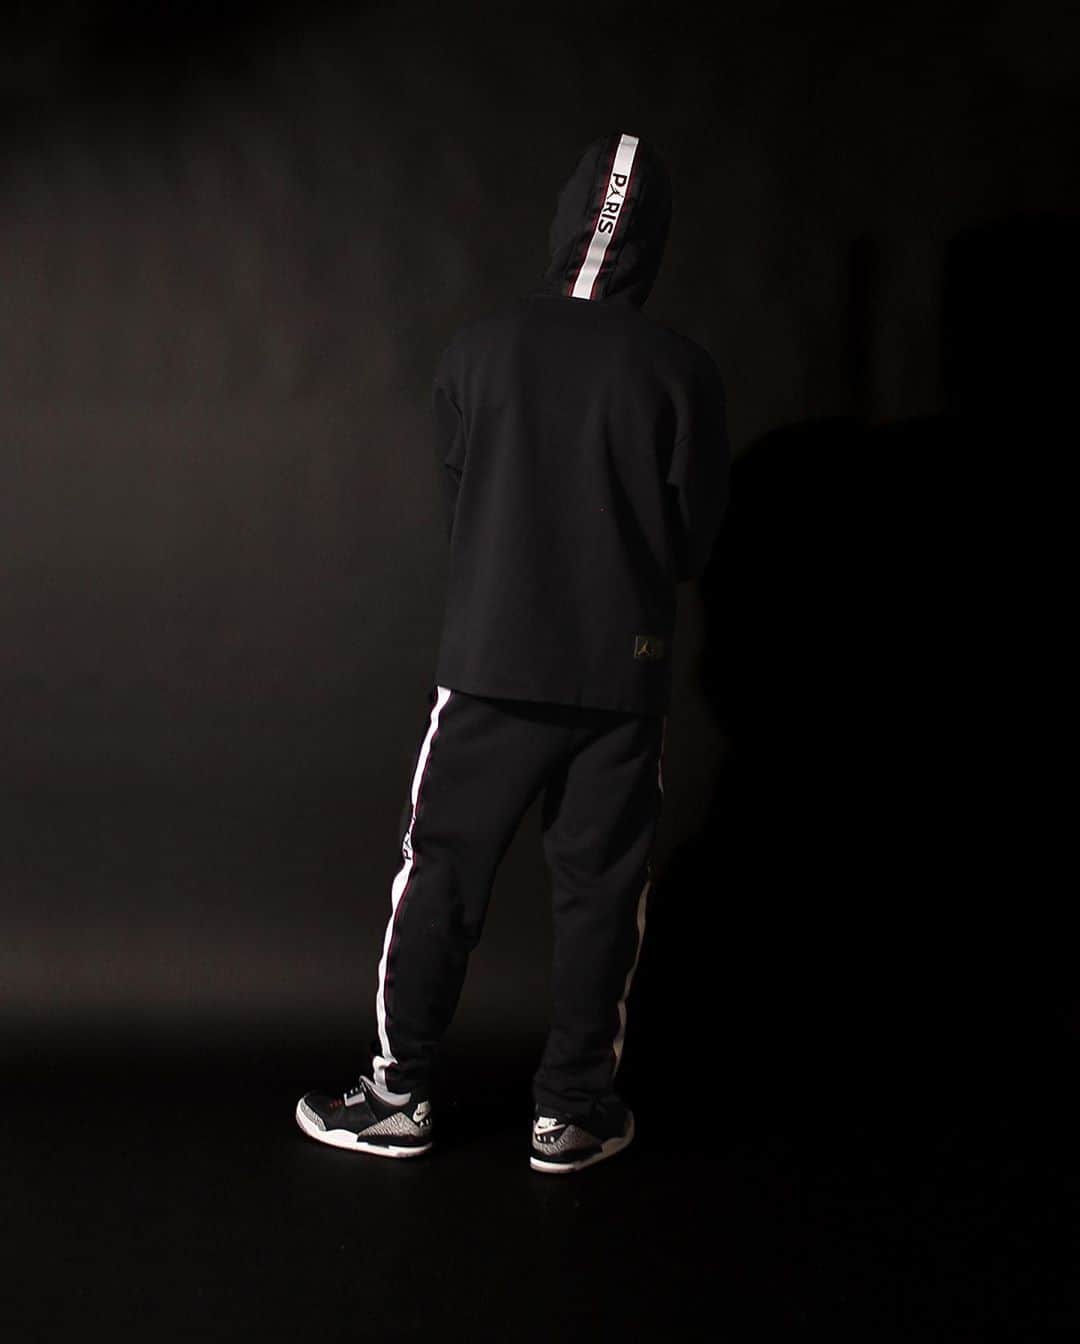 A+Sさんのインスタグラム写真 - (A+SInstagram)「2020 .10 .11 (sun) in store  ー SLIDE 2-3 ー ■NIKE JORDAN PSG PO TAPED HOODIE COLOR : BLACK SIZE : S - 2XL PRICE : ¥12,000 (+TAX)  このパリサンジェルマンプルオーバーパーカーでは、サッカー文化とストリートウェアのクチュールが出会う。リラックス感のある上質な厚手の生地で作られています。フードに沿ったポップカラーのテープのディテールと、房状のシェニール糸で作られた円形のパリ/ジャンプマンのデザインが、スタイルと特徴を与えています。  PARIS X JORDAN PRIDE. Soccer culture meets streetwear couture in this Paris Saint-Germain Pullover Hoodie. It's made from premium heavyweight fabric with a relaxed feel. Pop-color tape detail along the hood and a circular Paris/Jumpman design made from tufted chenille yarns give it style and distinction.  ■NIKE JORDAN PSG PANT COLOR : BLACK SIZE : S - 2XL PRICE : ¥10,000 (+TAX)  パリのタッチで暖かくリラックス。暖かく、リラックスしてたシルエットが快適。サイドシームに沿ってストライプの「PARIS」テープが特徴です。  WARM AND RELAXED WITH A PARIS TOUCH. The Paris Saint-Germain Fleece Pants are warm, relaxed and easy to wear while navigating city streets. They feature striped "Paris" tape along the side seams.  ー SLIDE 4-5 ー ■NIKE JORDAN PSG FLEECE PO HOODIE COLOR : BLACK×BORDEAUX SIZE : S - 2XL PRICE : ¥9,500 (+TAX)  パリのプライドをアピールしましょう。リラックスしたフィット感の柔らかいフレンチテリーで作られており、大胆なパリ/ジャンプマンのグラフィックとクラブのディテールが特徴です。  PARIS PRIDE ON THE STREET. Make a show of your Parisian pride in the Paris Saint-Germain Fleece Pullover Hoodie. Made from soft French terry with a relaxed fit, it features a bold Paris/Jumpman graphic and club details.  #a_and_s #NIKE #PSG #JORDAN #JUMPMAN #JUMPMAN23 #NIKEJORDAN #JORDANBRAND #JORDANBRANDPSG #CICESTPARIS #PANAME」10月7日 12時03分 - a_and_s_official